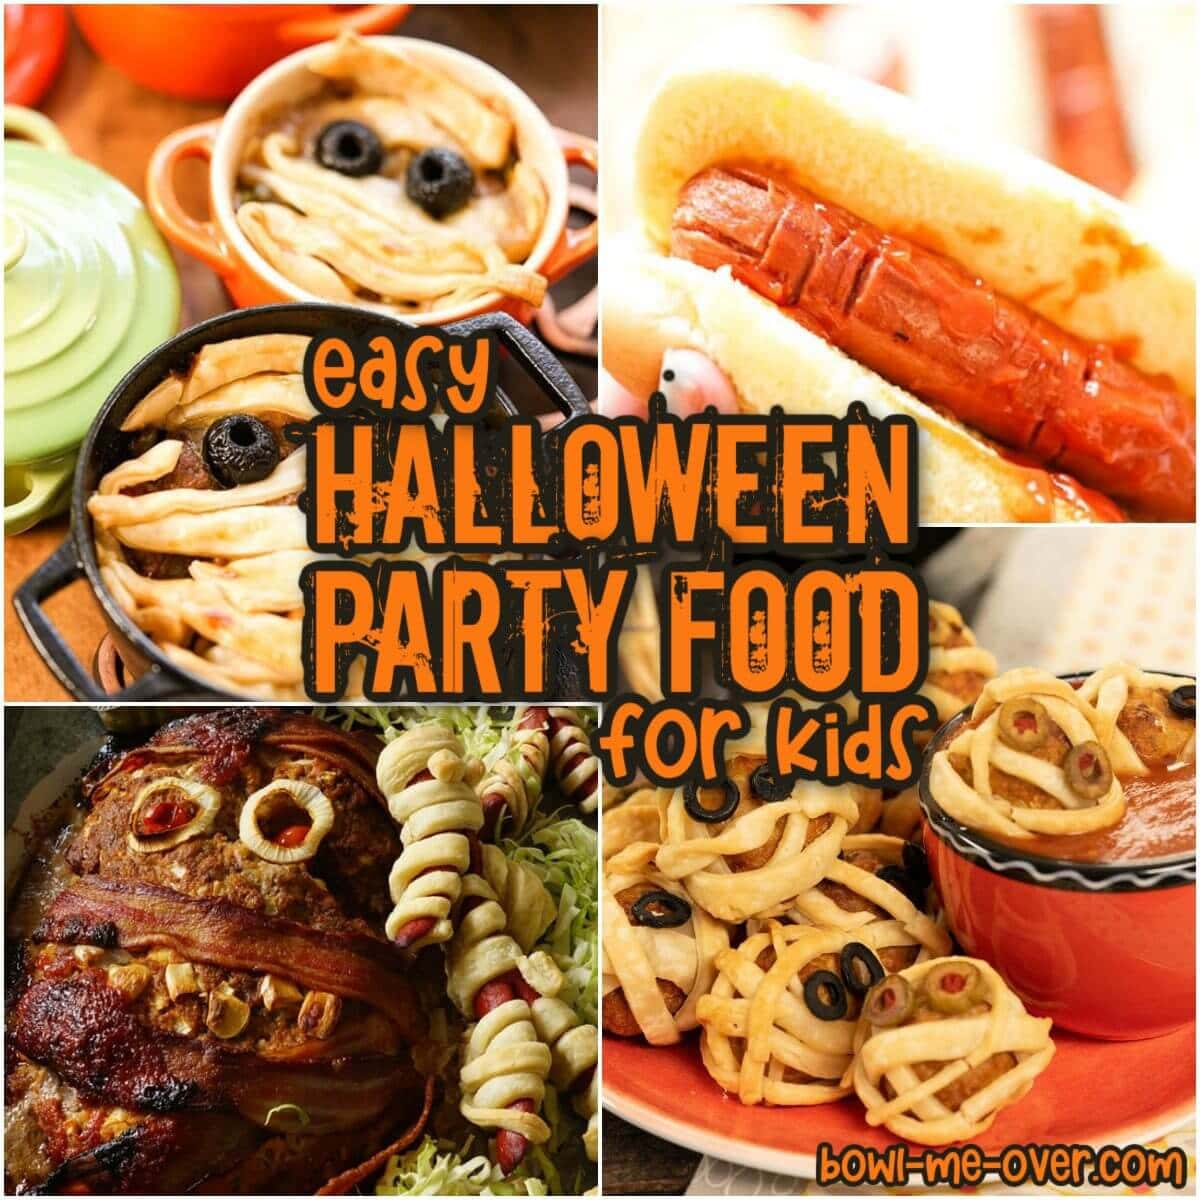 Photos of easy to make Halloween Party Food ideas!